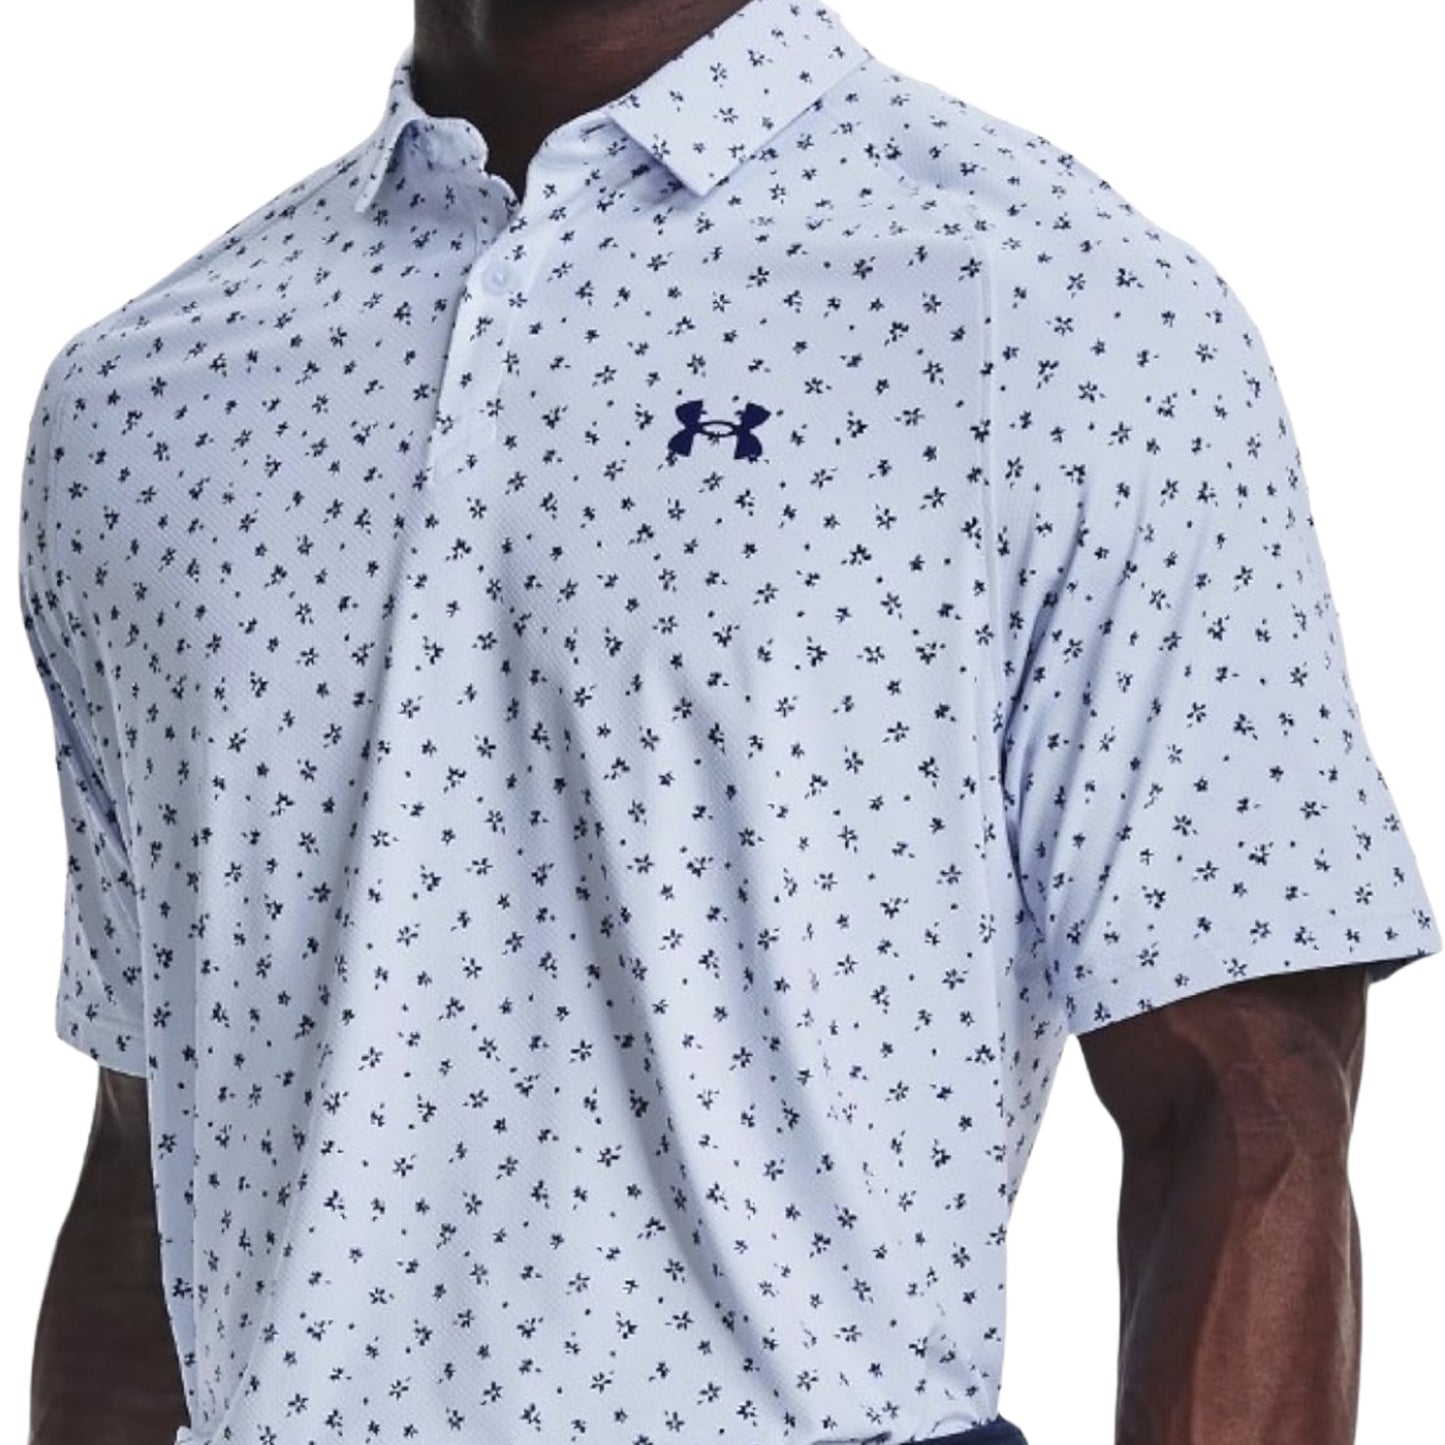 Under Armour ISO-Chill Printed Polo - Oxford Blue